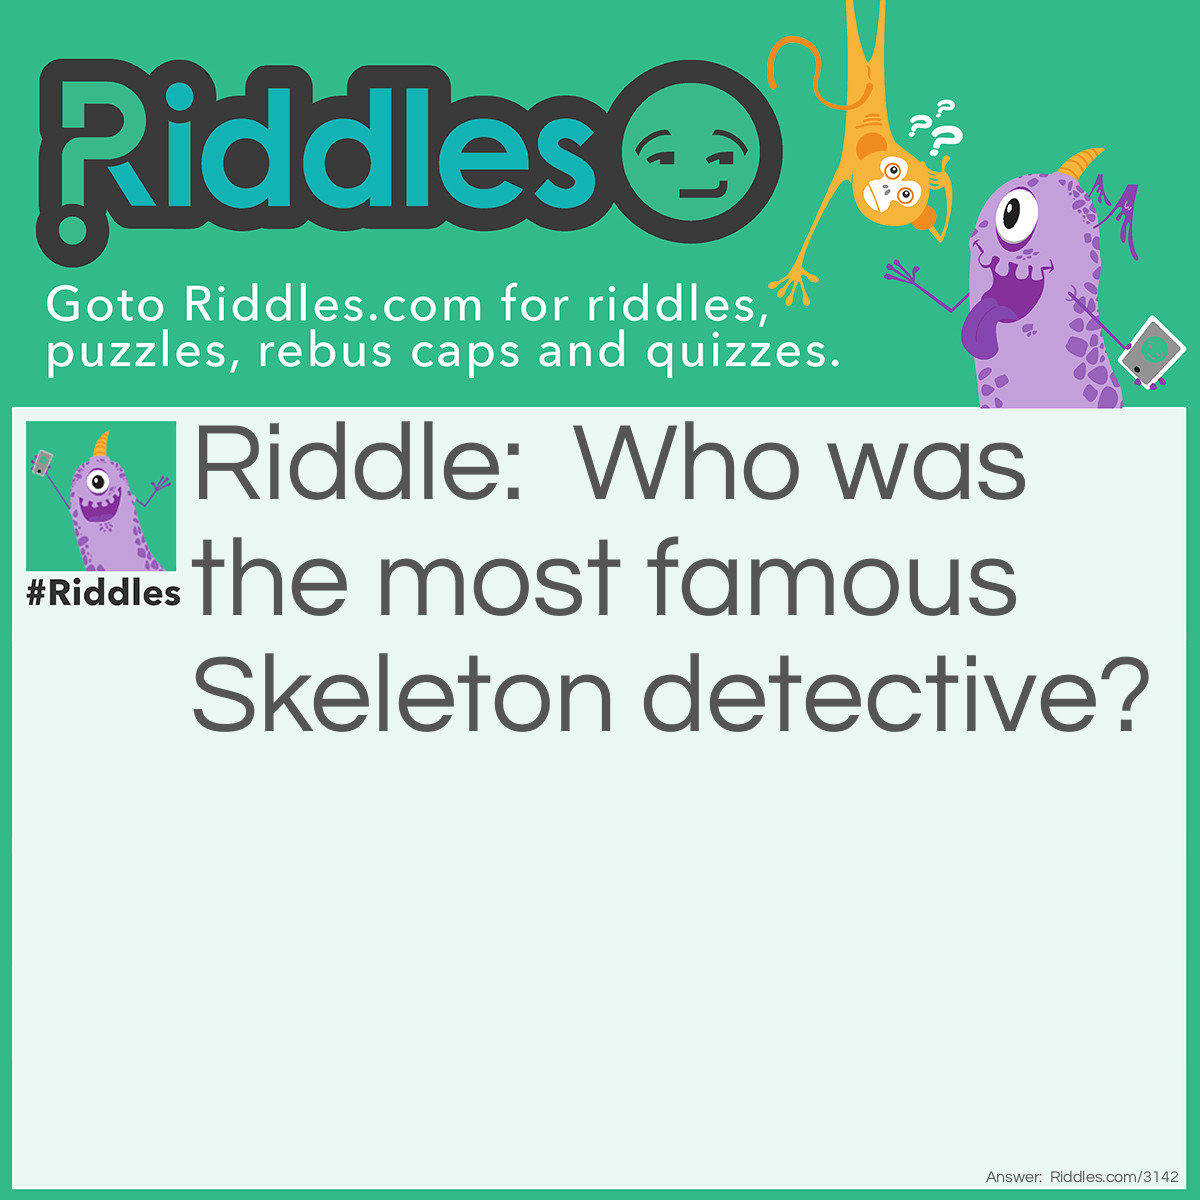 Riddle: Who was the most famous Skeleton detective? Answer: Sherlock Bones.